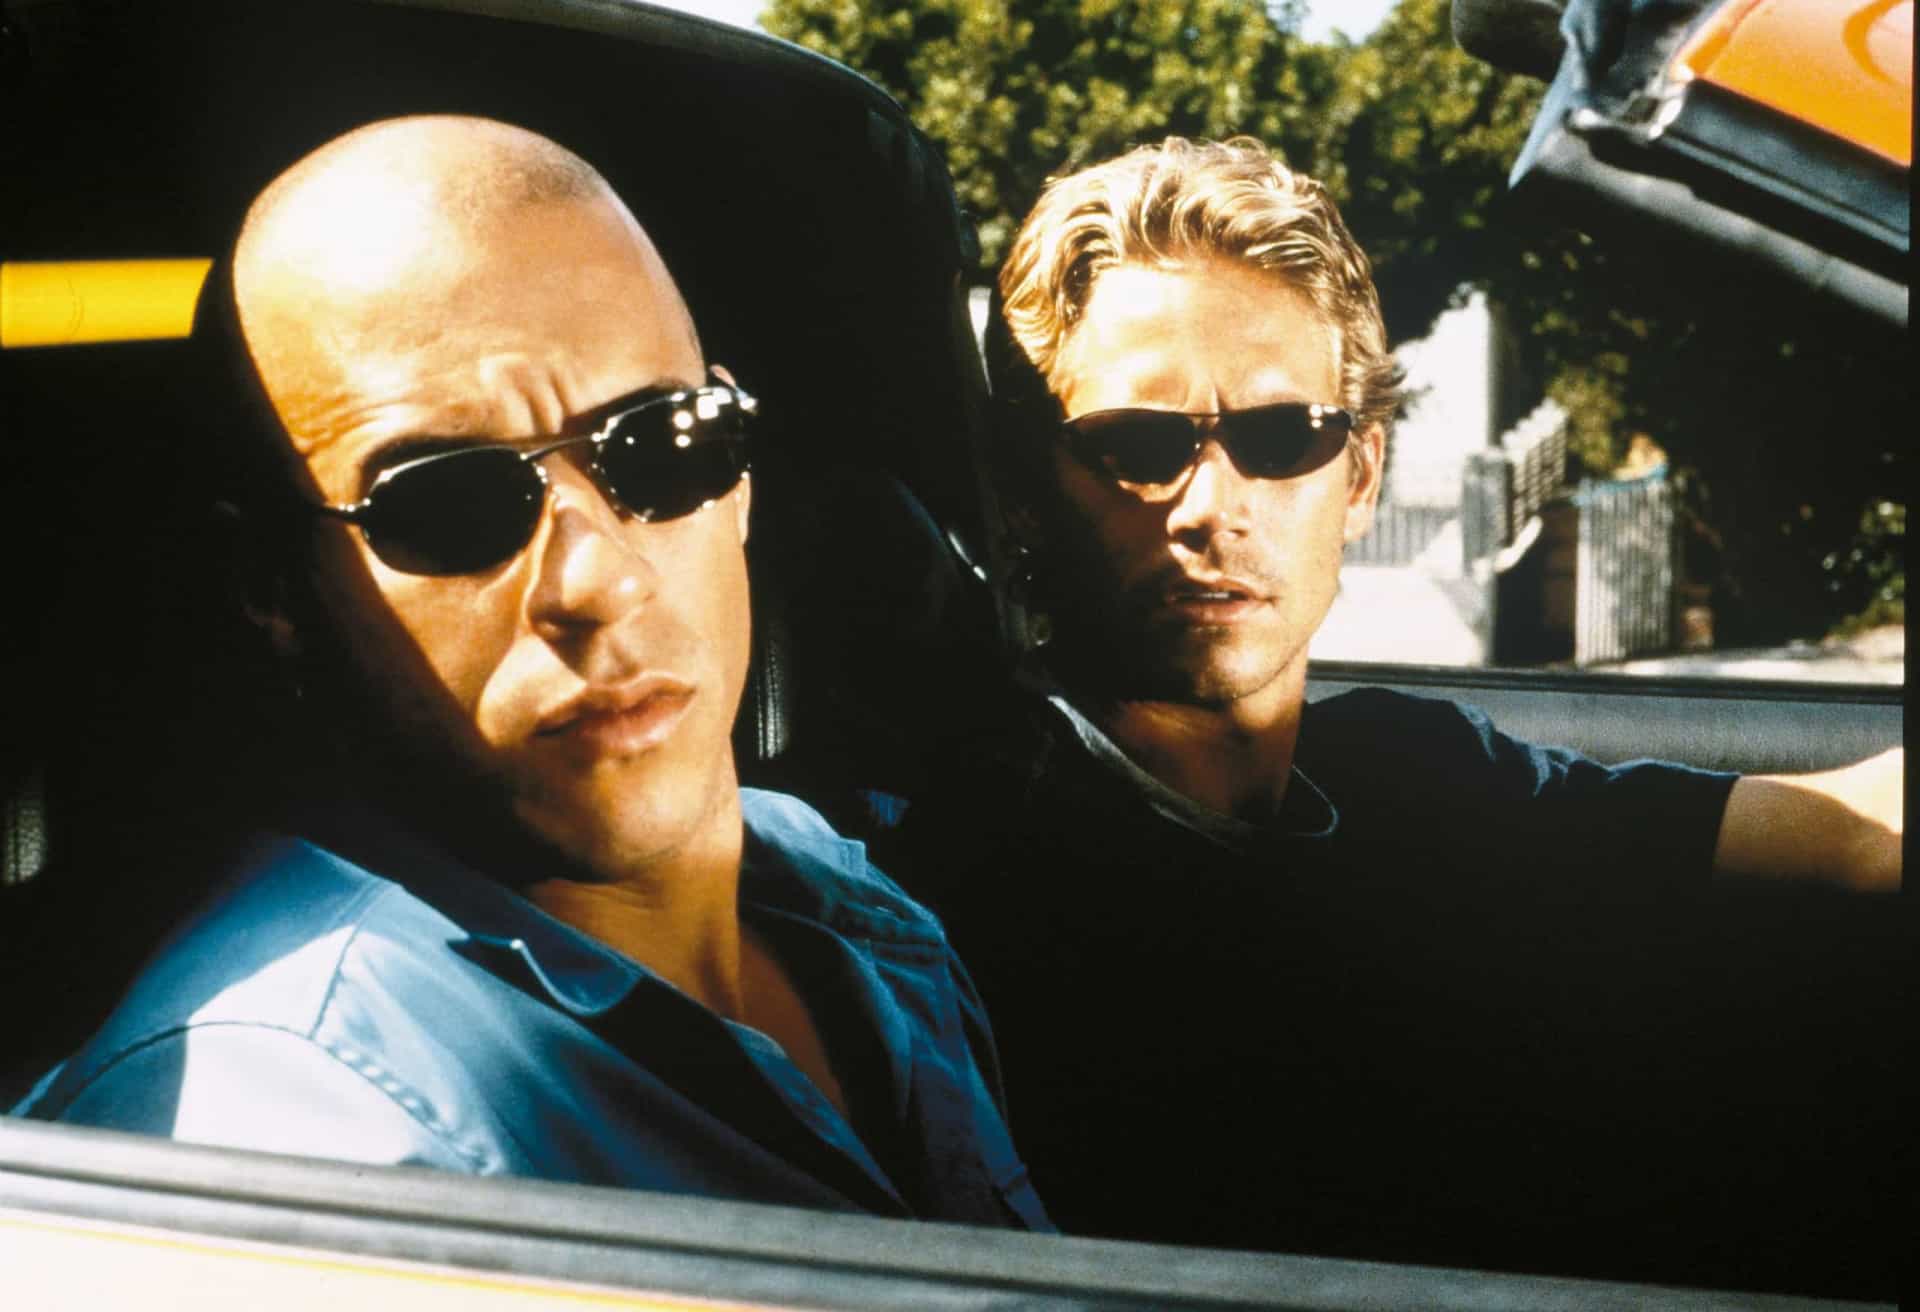 <p>'<a href="https://www.starsinsider.com/movies/325066/fast-and-furious-the-thrilling-story-so-far" rel="noopener">The Fast and the Furious</a>' (2001) shares the use of cars with its 1955 predecessor, but that's where the similarities end. We have street racers, an undercover FBI investigator, and lots of action.</p><p>You may also like:<a href="https://www.starsinsider.com/n/157658?utm_source=msn.com&utm_medium=display&utm_campaign=referral_description&utm_content=519875en-us"> The mystery surrounding the missing Malaysia Airlines plane</a></p>